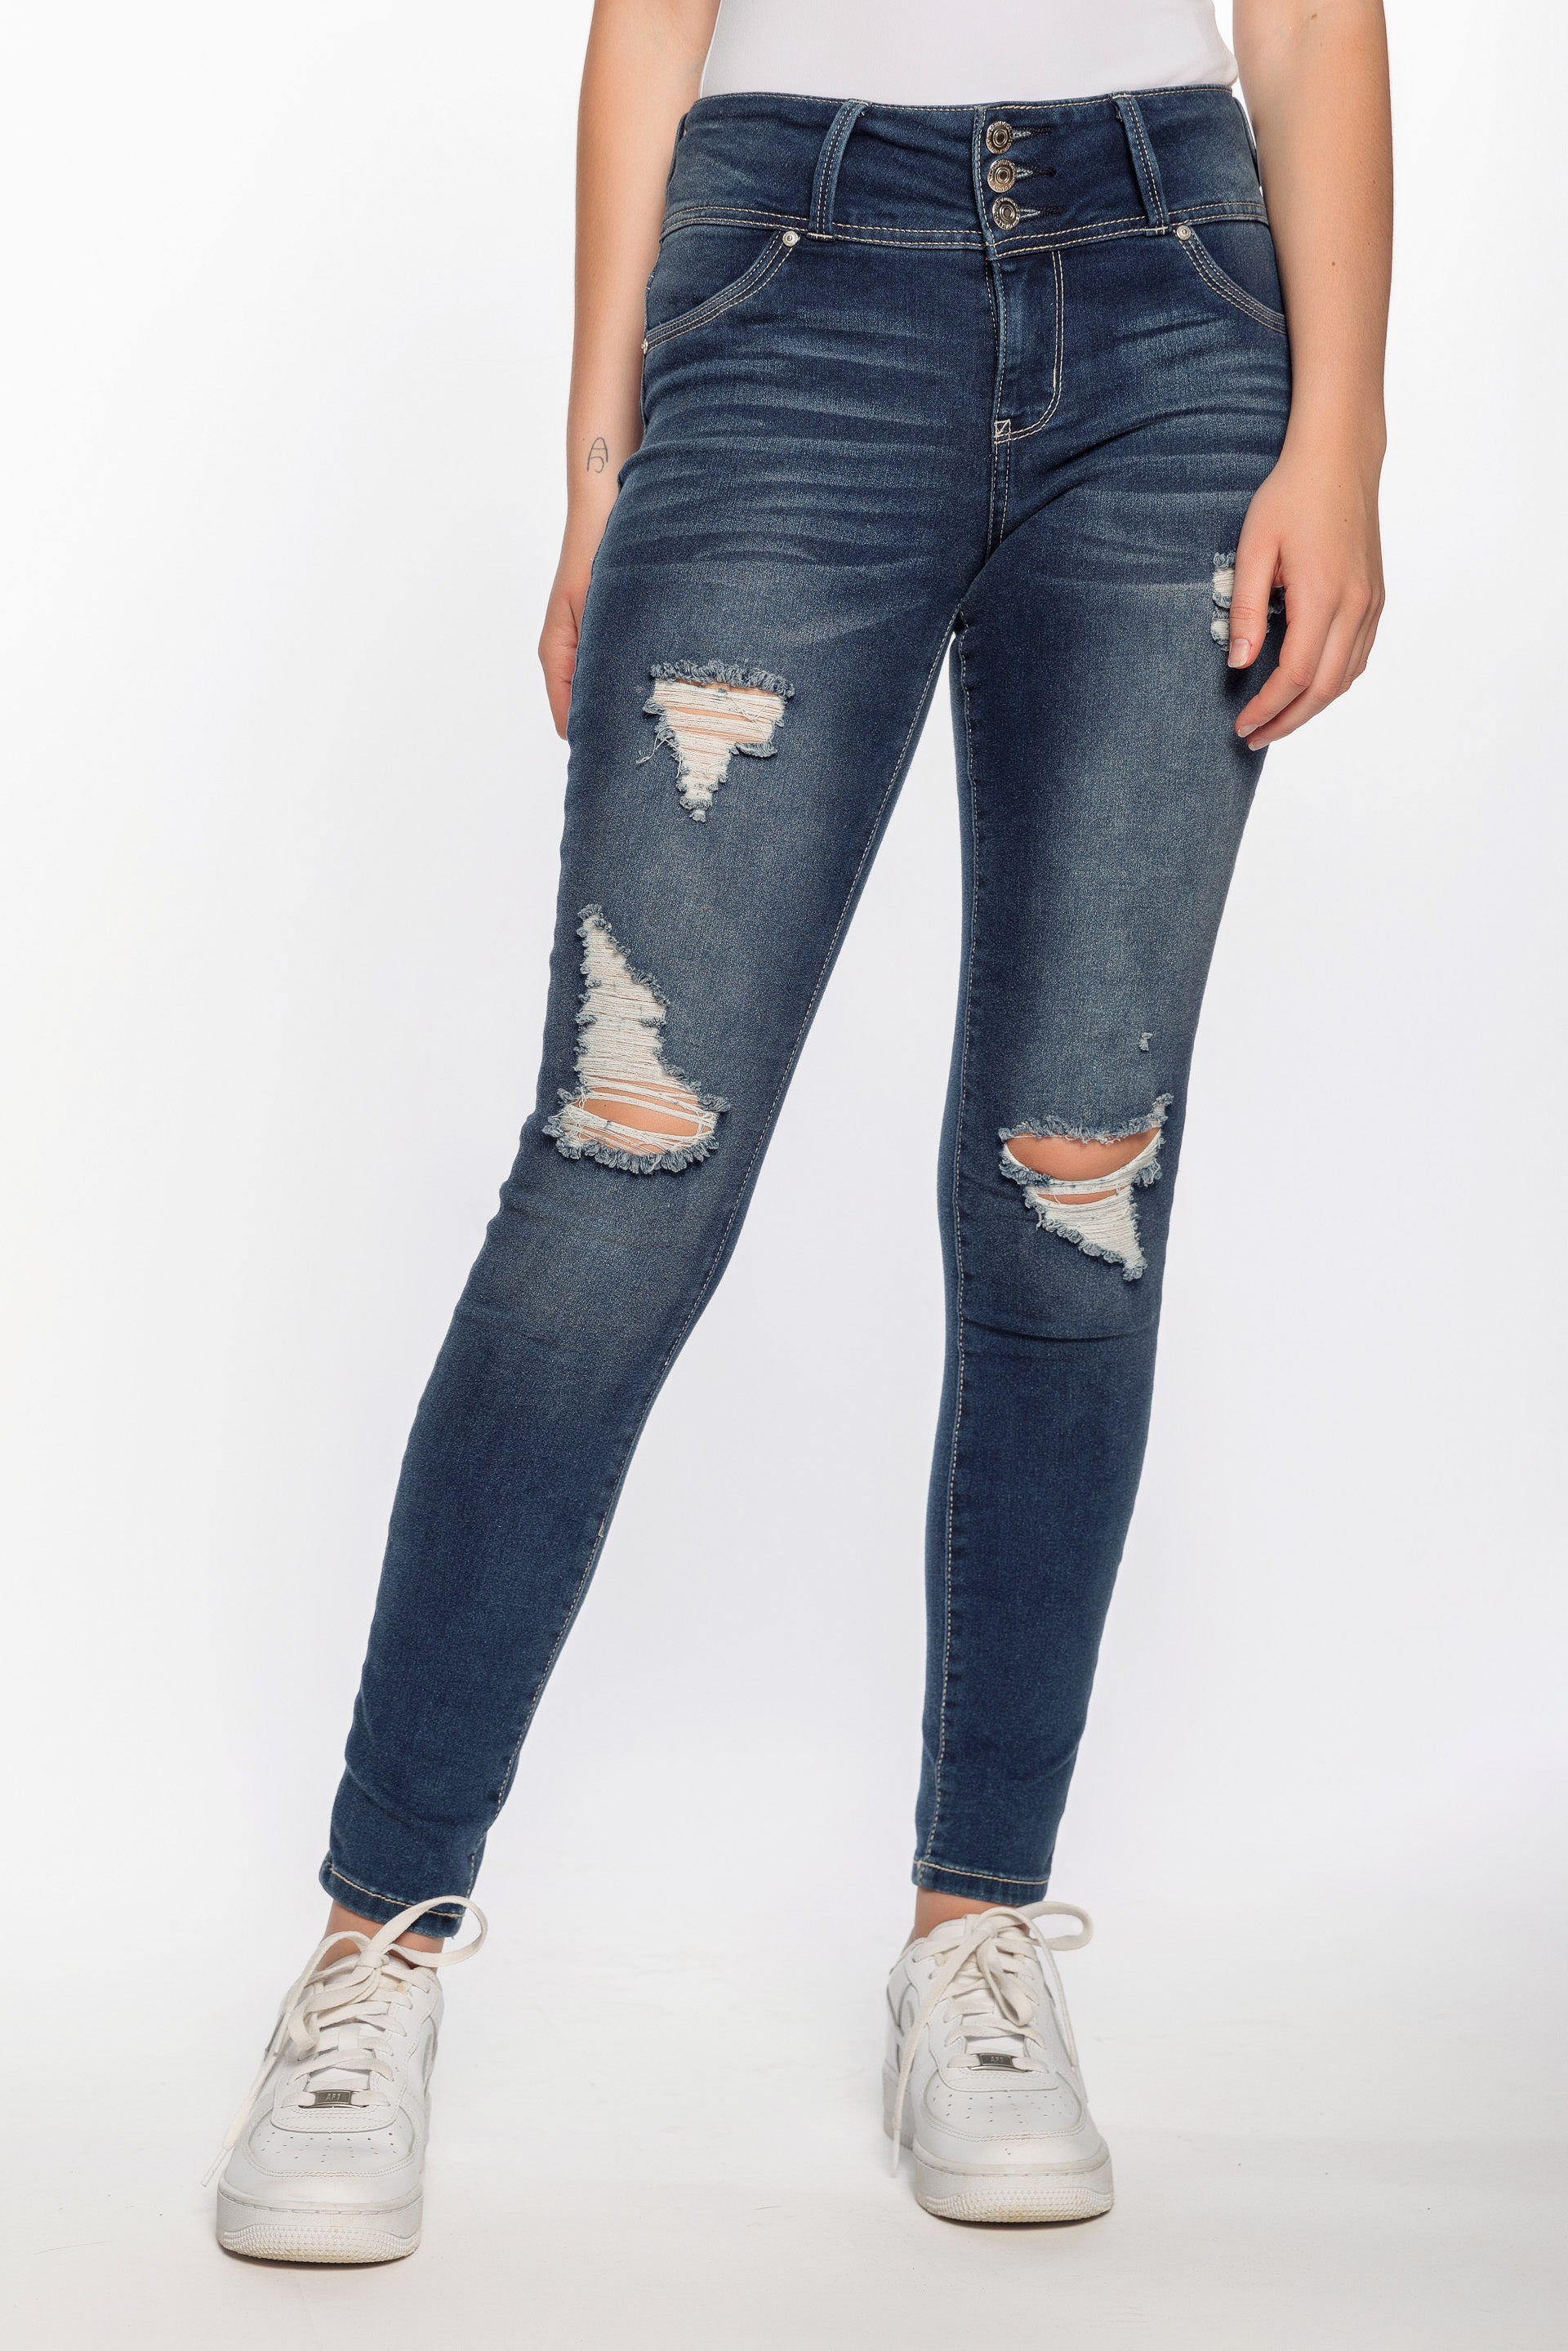 WallFlower Iris Wash Insta-Soft Sassy Skinny Distressed High-Rise Jegging with Triple Button Fly